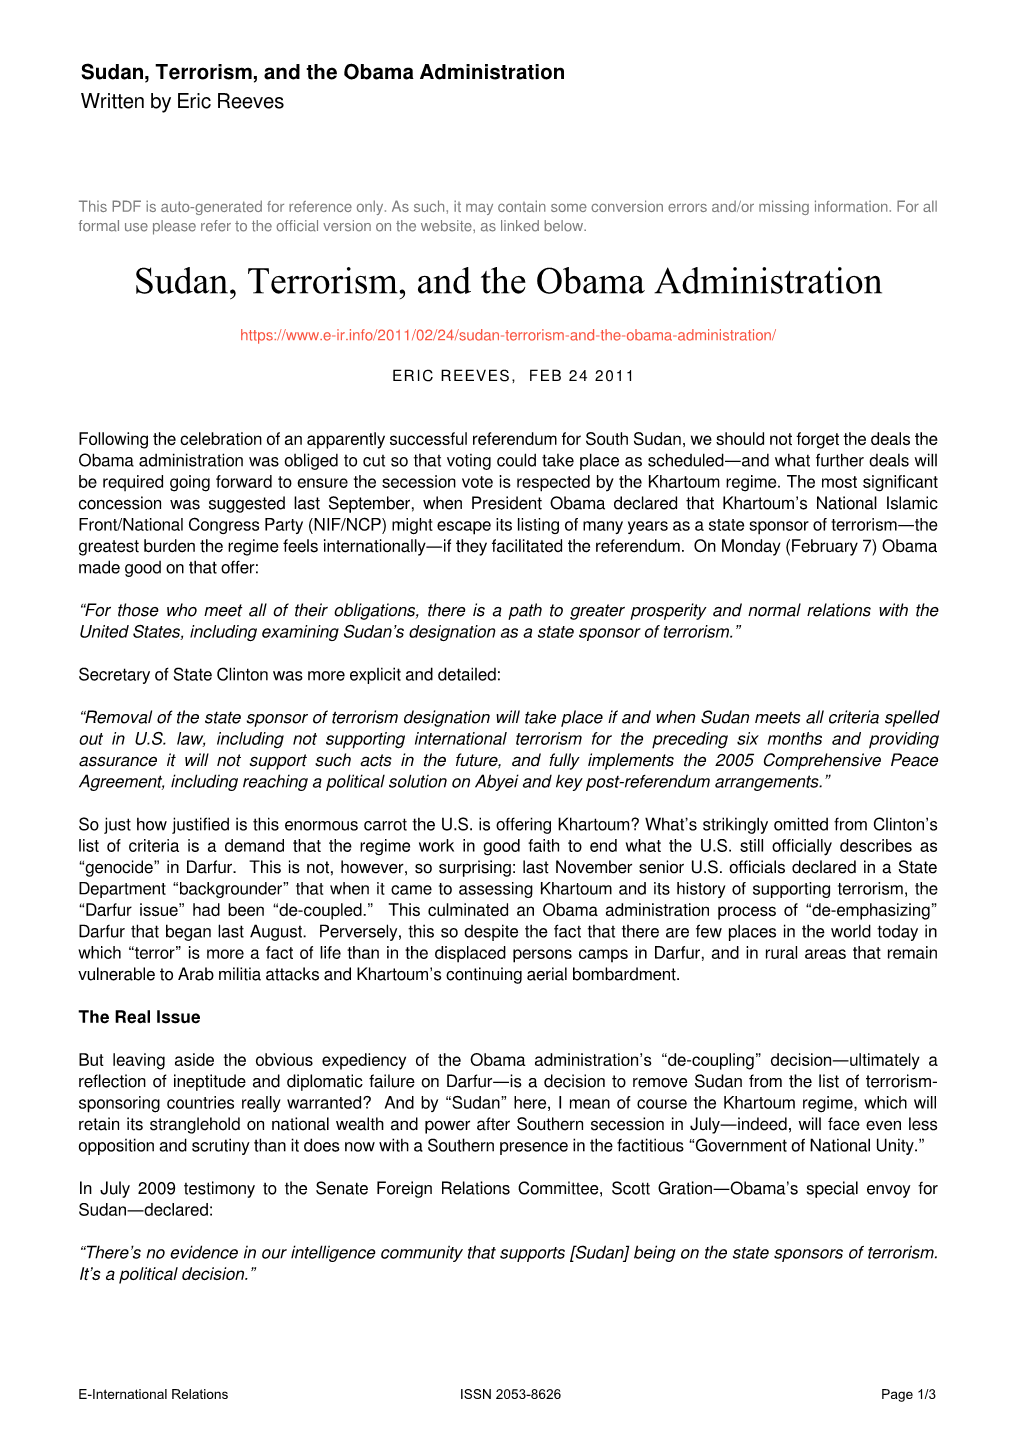 Sudan, Terrorism, and the Obama Administration Written by Eric Reeves